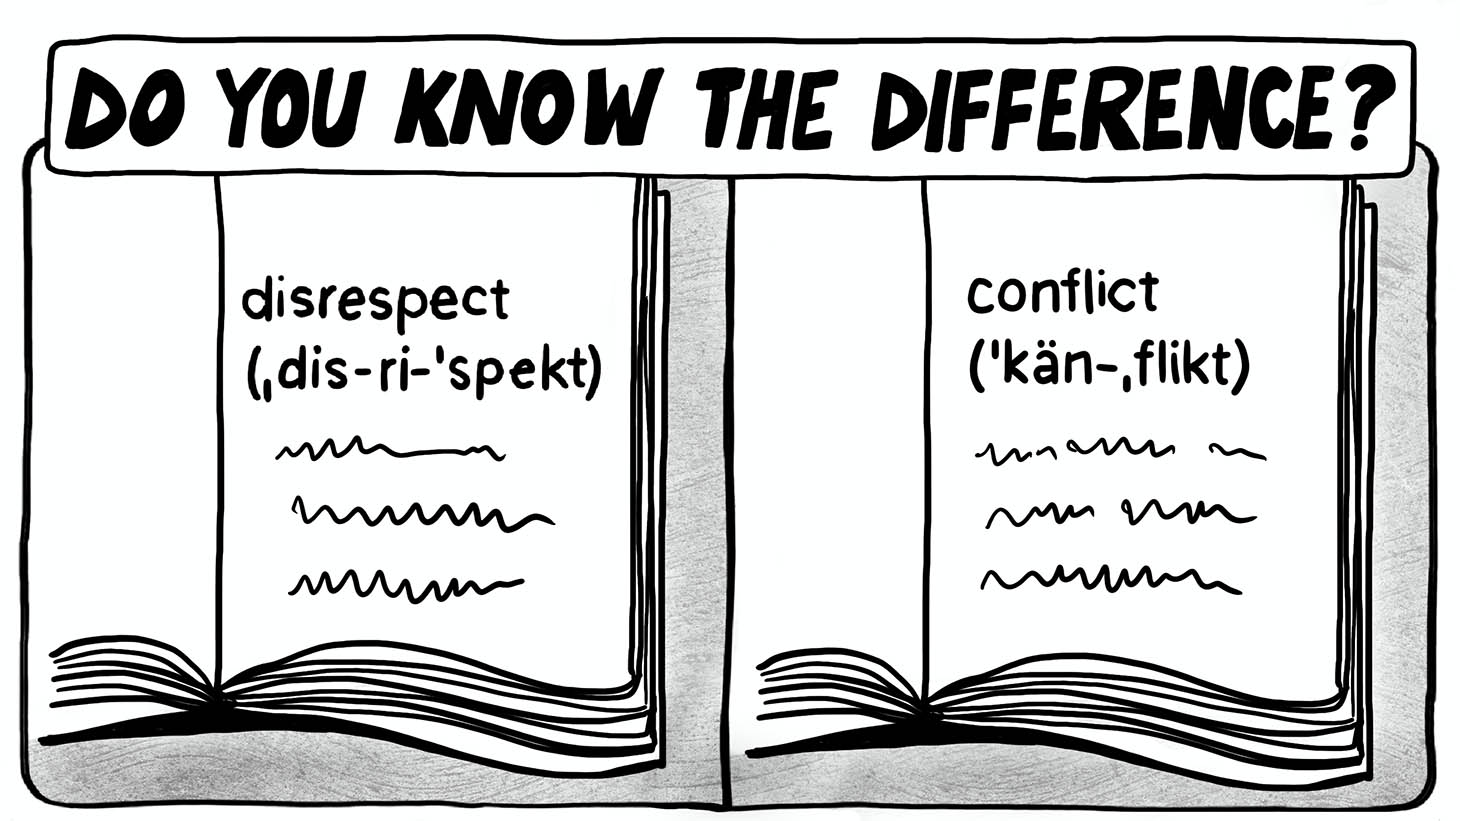 Definitions: The difference between conflict and disrespect.